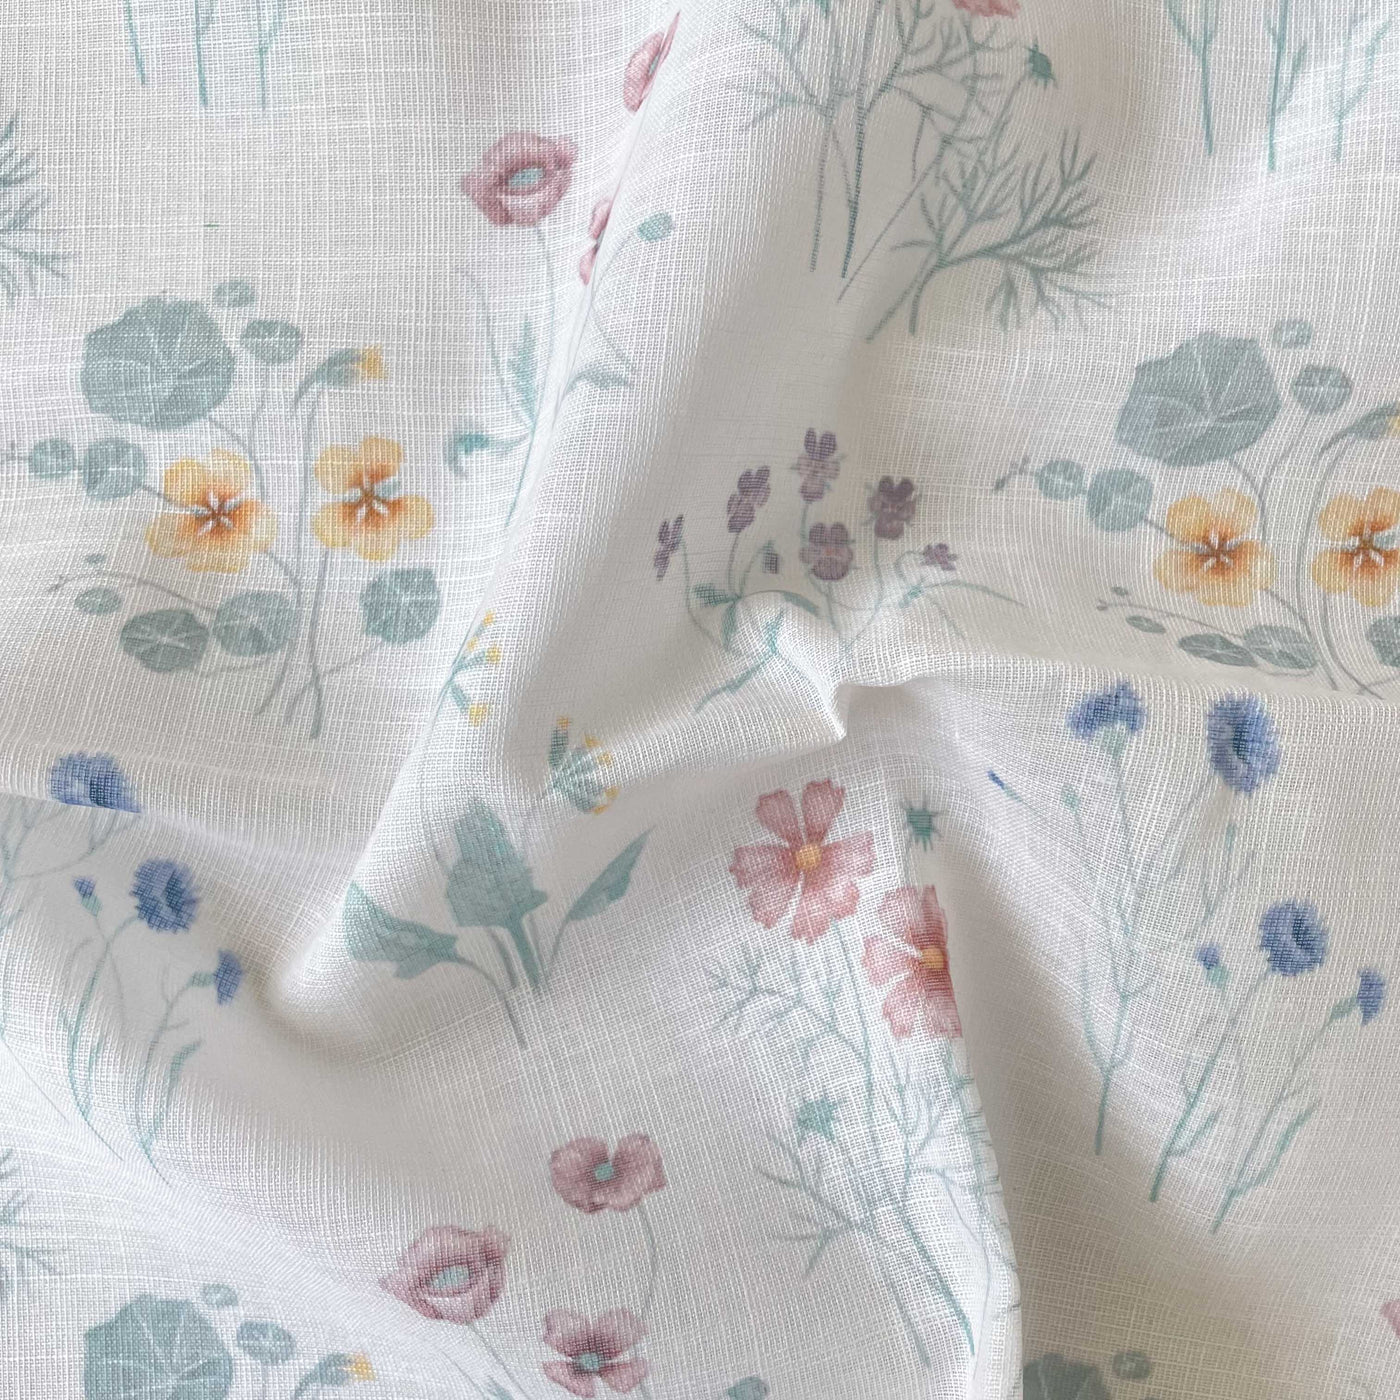 Digital Printed Linen Neps Fabric Colorful Botanicals Printed Linen Neps Fabric (Width 42 Inches)